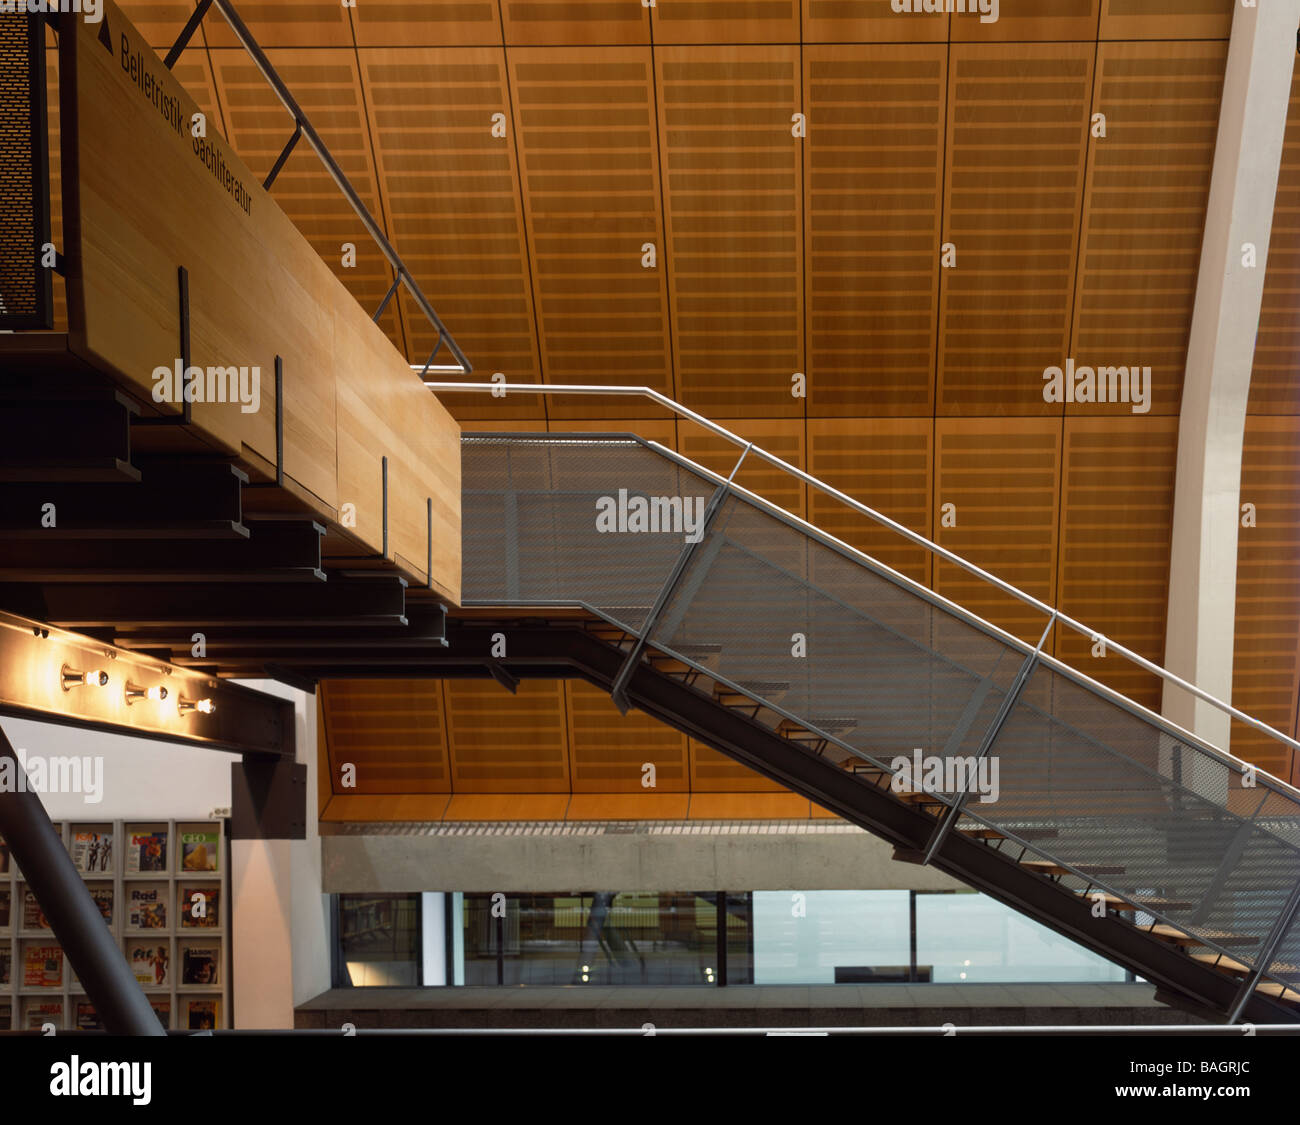 Munster Library, Munster, Germany, Bolles Wilson, Munster library stairs. Stock Photo